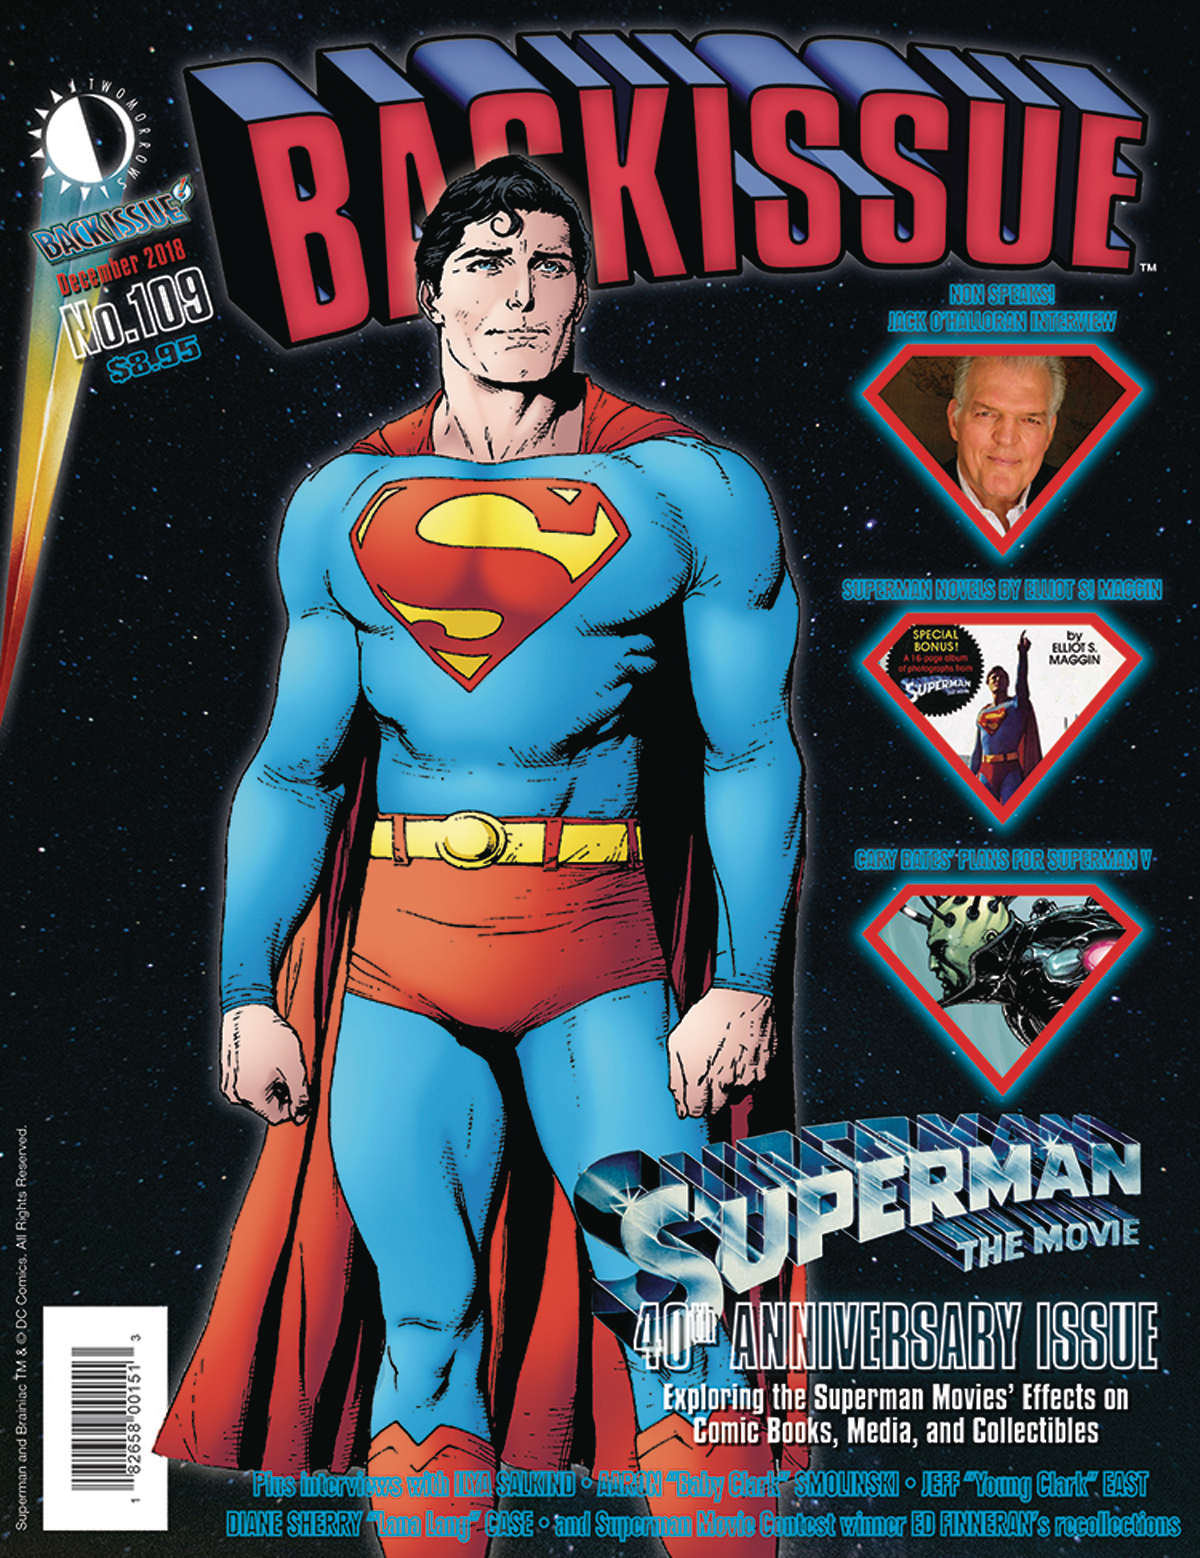 BACK ISSUE #109